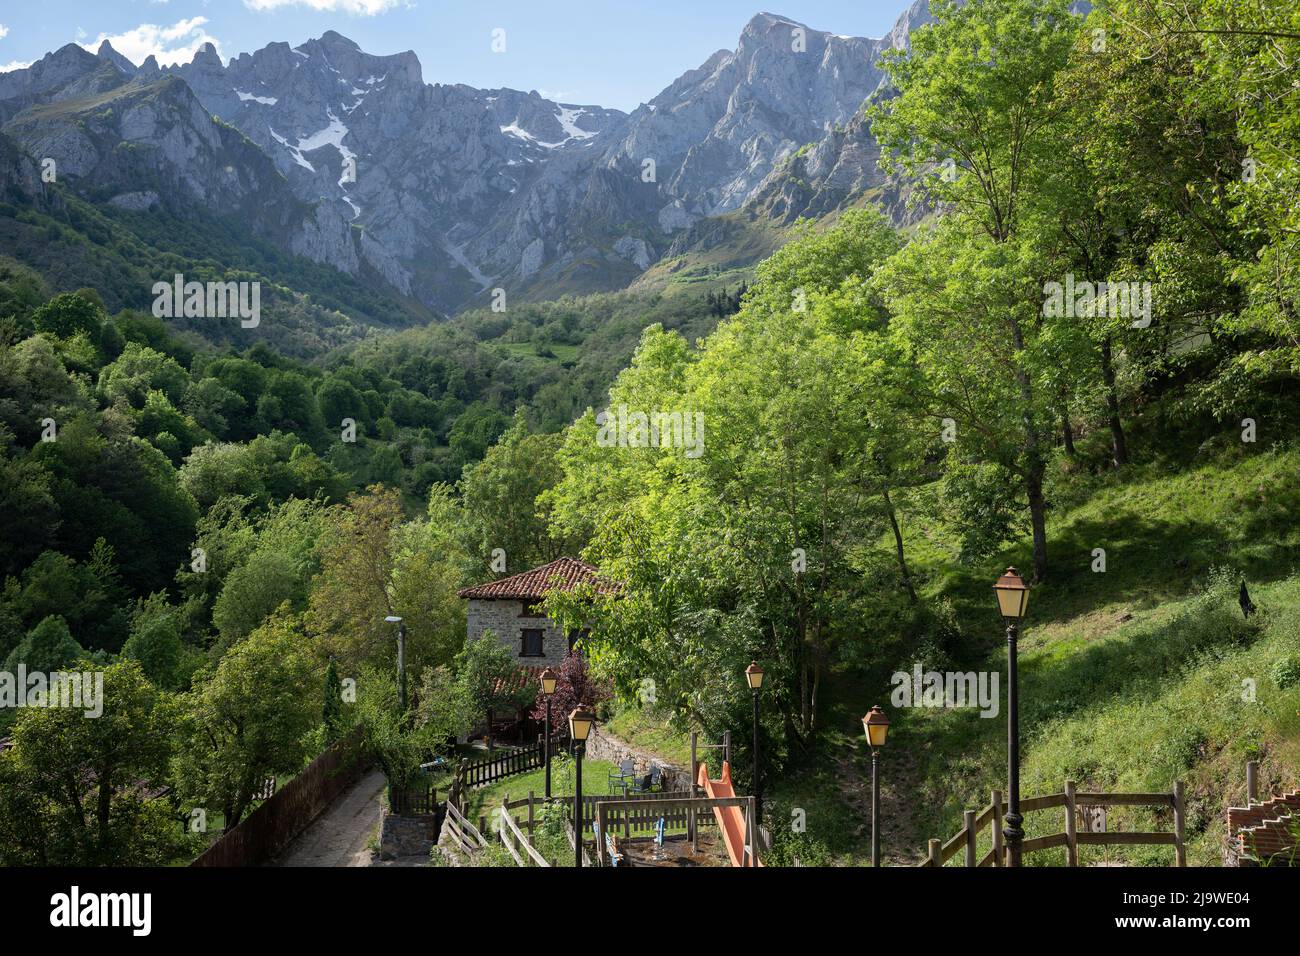 A landscape of foothills and mountain peaks above the hamlet of Lon near Potes, a popular tourist gateway for those entering the Spanish Picos de Europa National Park region, on 17th May 2022, Lon, Asturias, Spain. Stock Photo